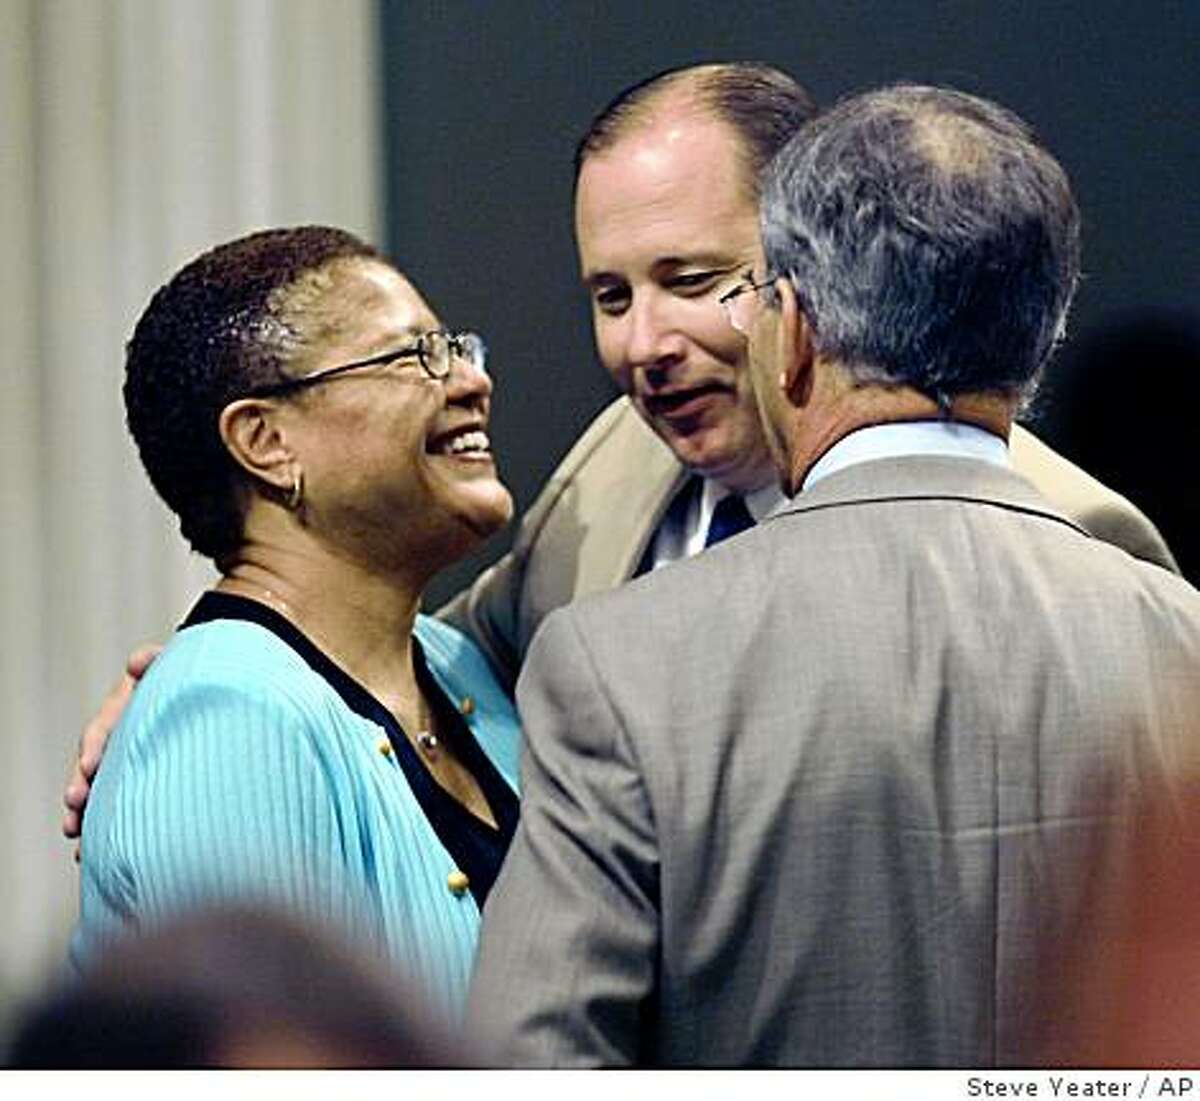 Assembly Speaker Karen Bass, left, D-Los Angeles, talks with Assembly Minority Leader Mike Villines, R-Clovis, center and Assemblyman Roger Niello, R-Fair Oaks, right, after the Assembly voted to pass the state budget at the Capitol in Sacramento, Calif., on Friday, Sept. 19, 2008. (AP Photo/Steve Yeater)